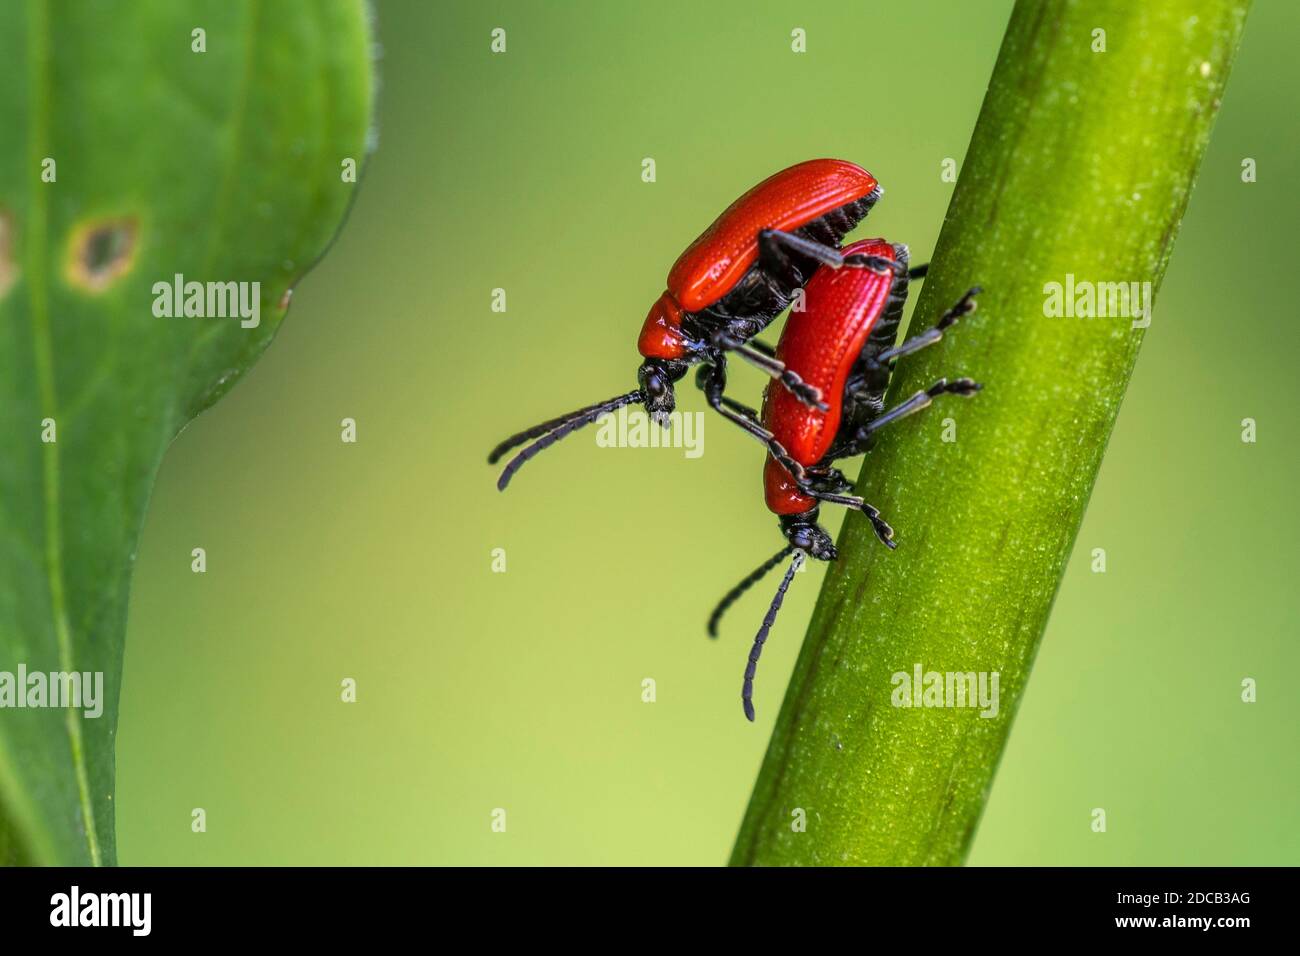 Scarlet lily beetle, Red lily beetle, Lily leaf beetle, Lily beetle (Lilioceris lilii), mating, Germany, Baden-Wuerttemberg Stock Photo